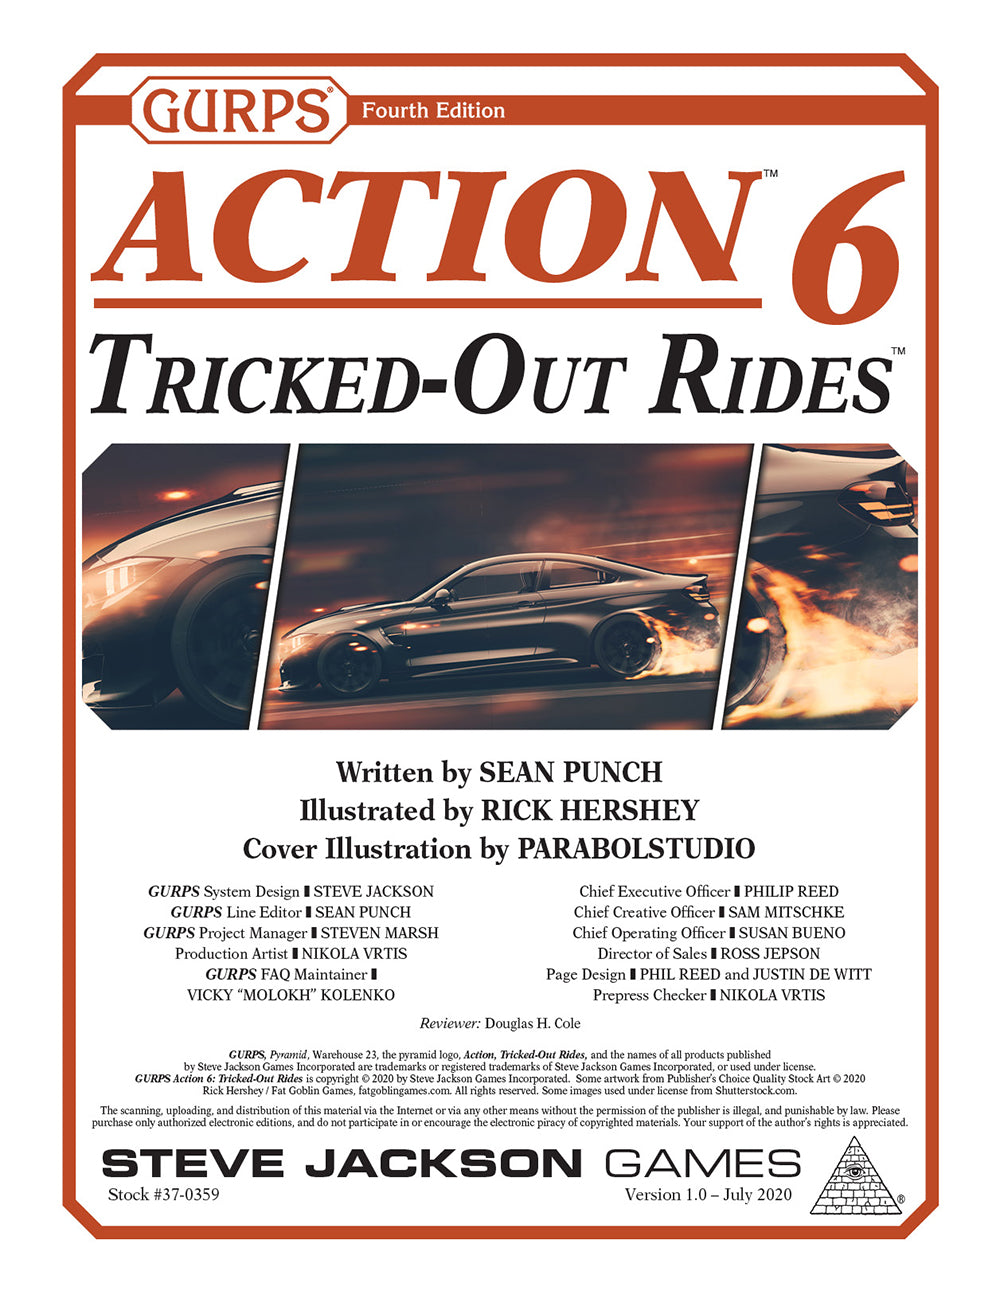 GURPS Action 6: Tricked-Out Rides